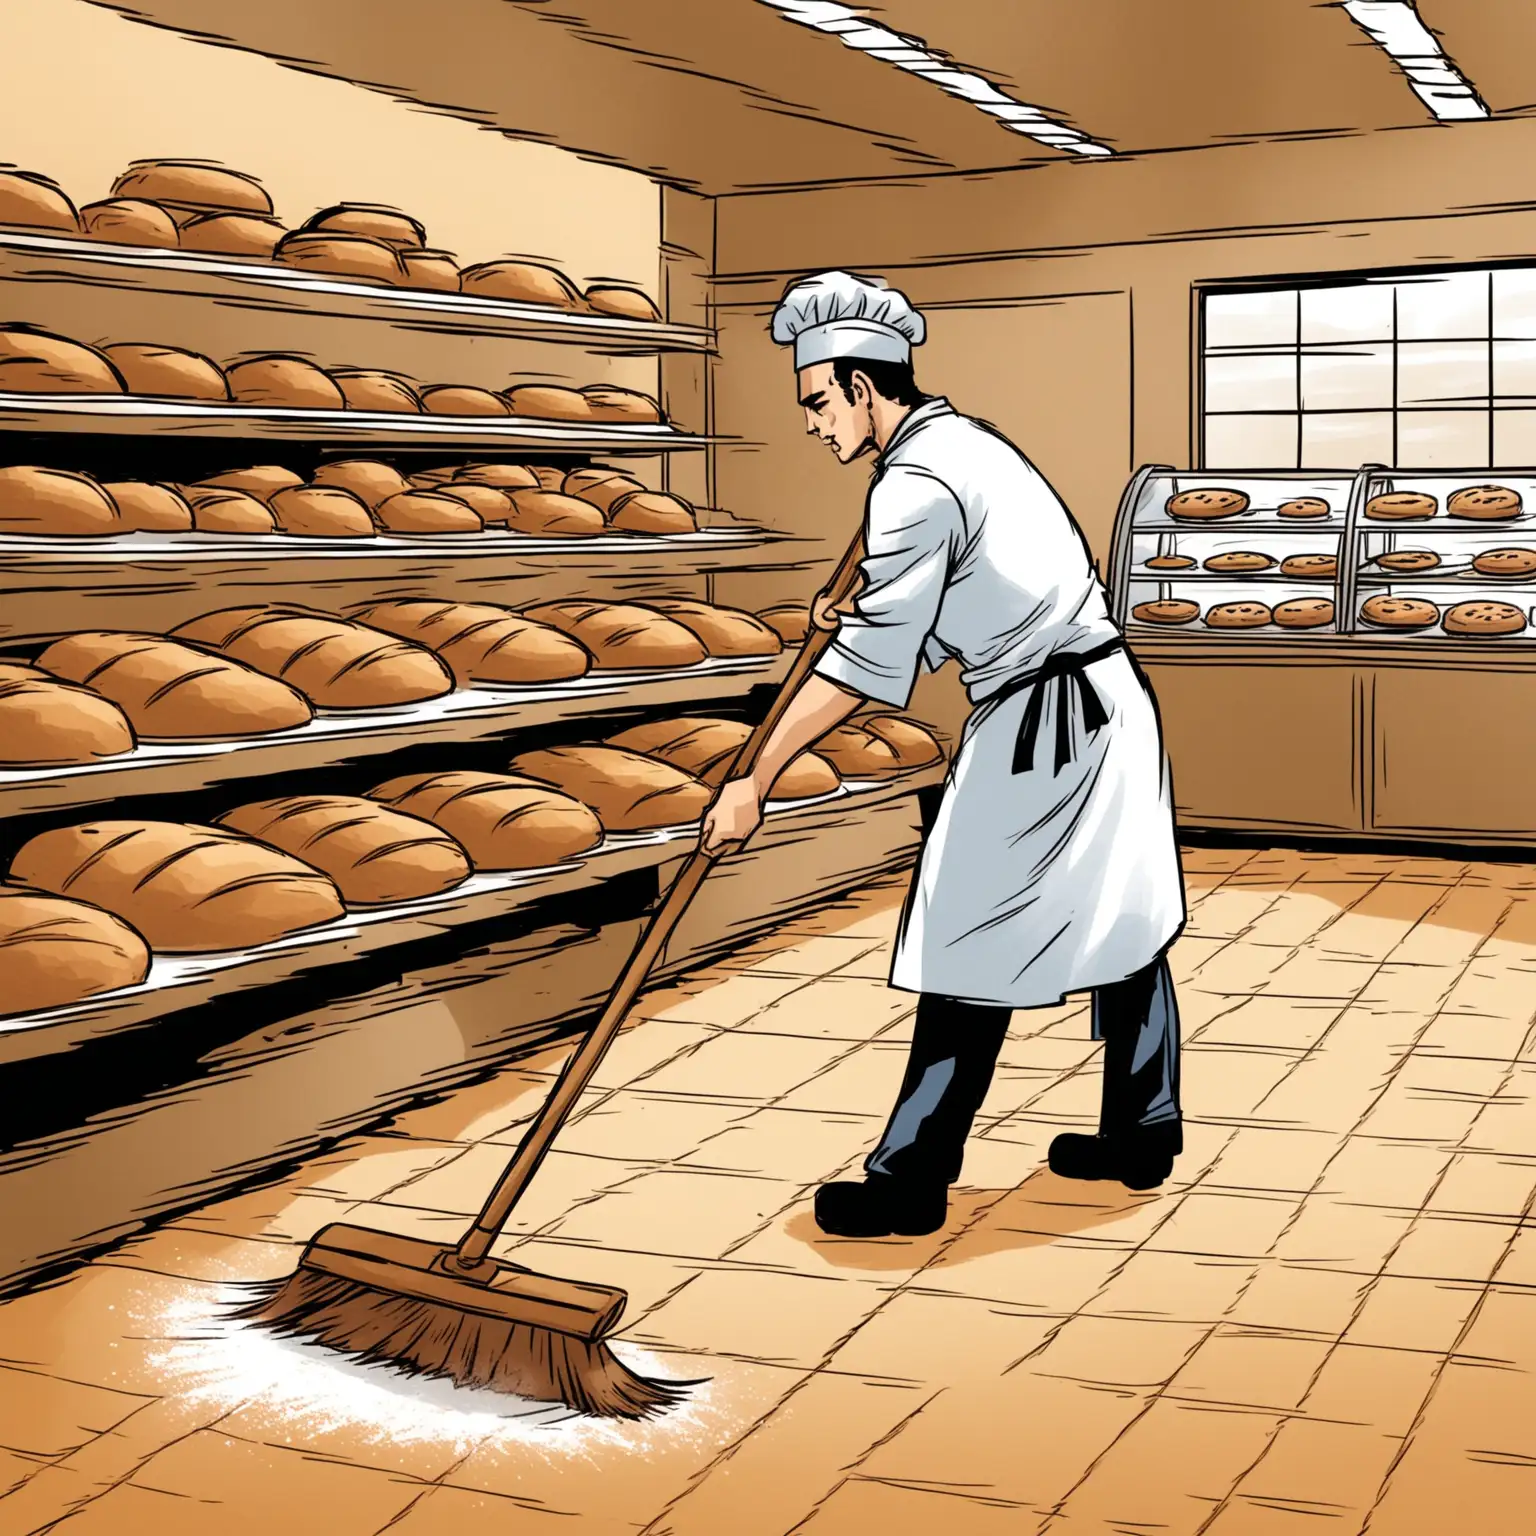 draw a comic book image of a baker sweeping the floor in the bakery 